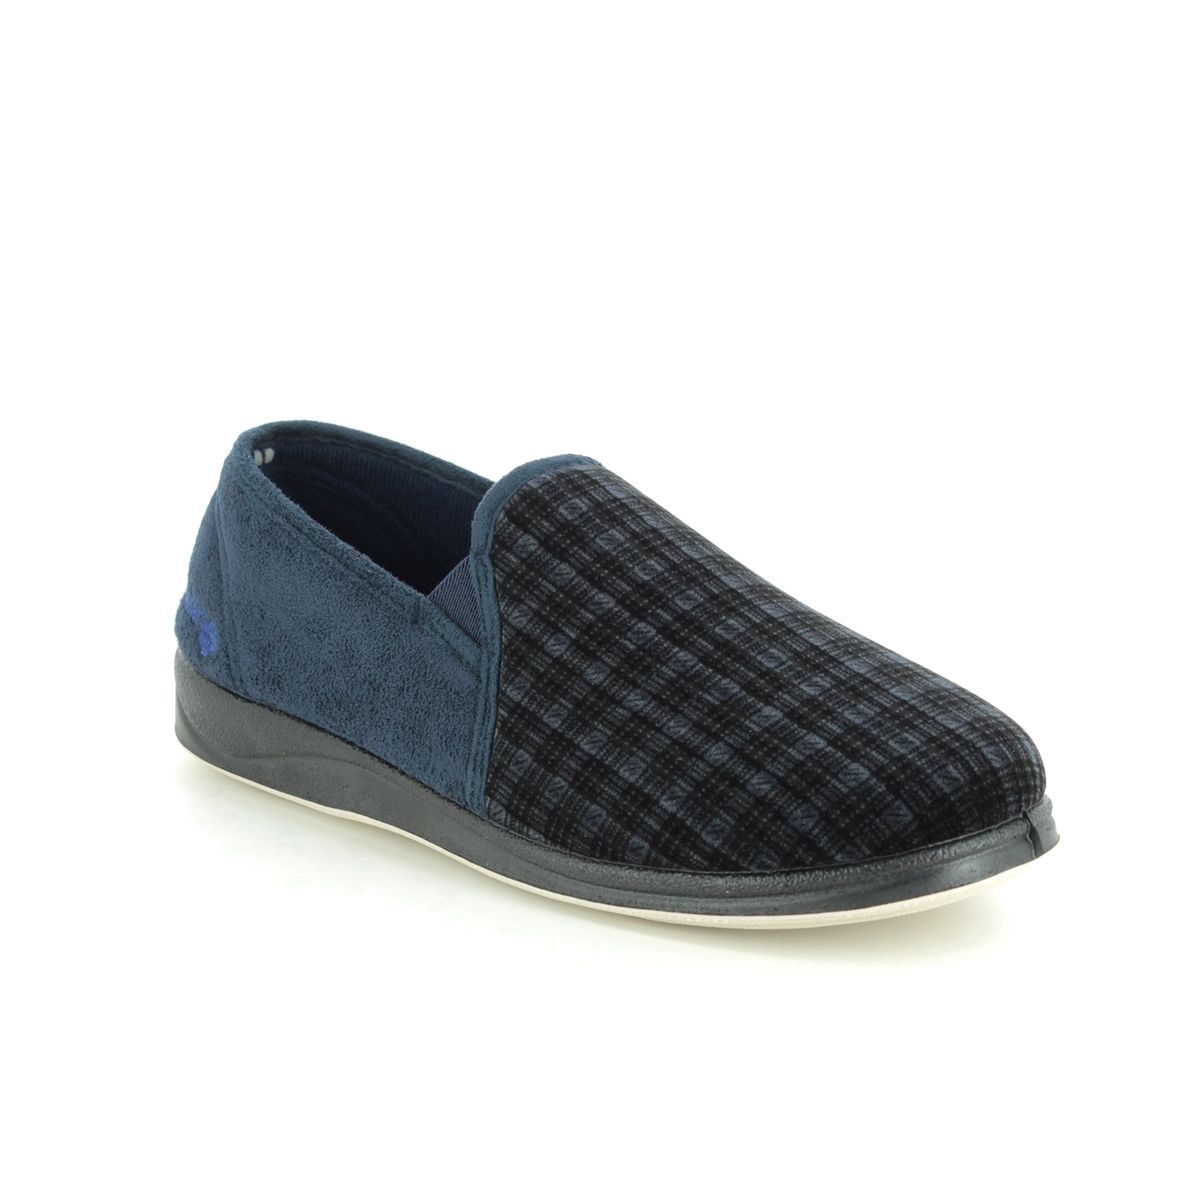 Padders Albert G Fit Navy Mens slippers 408S-96 in a Tartan Textile in Size 8